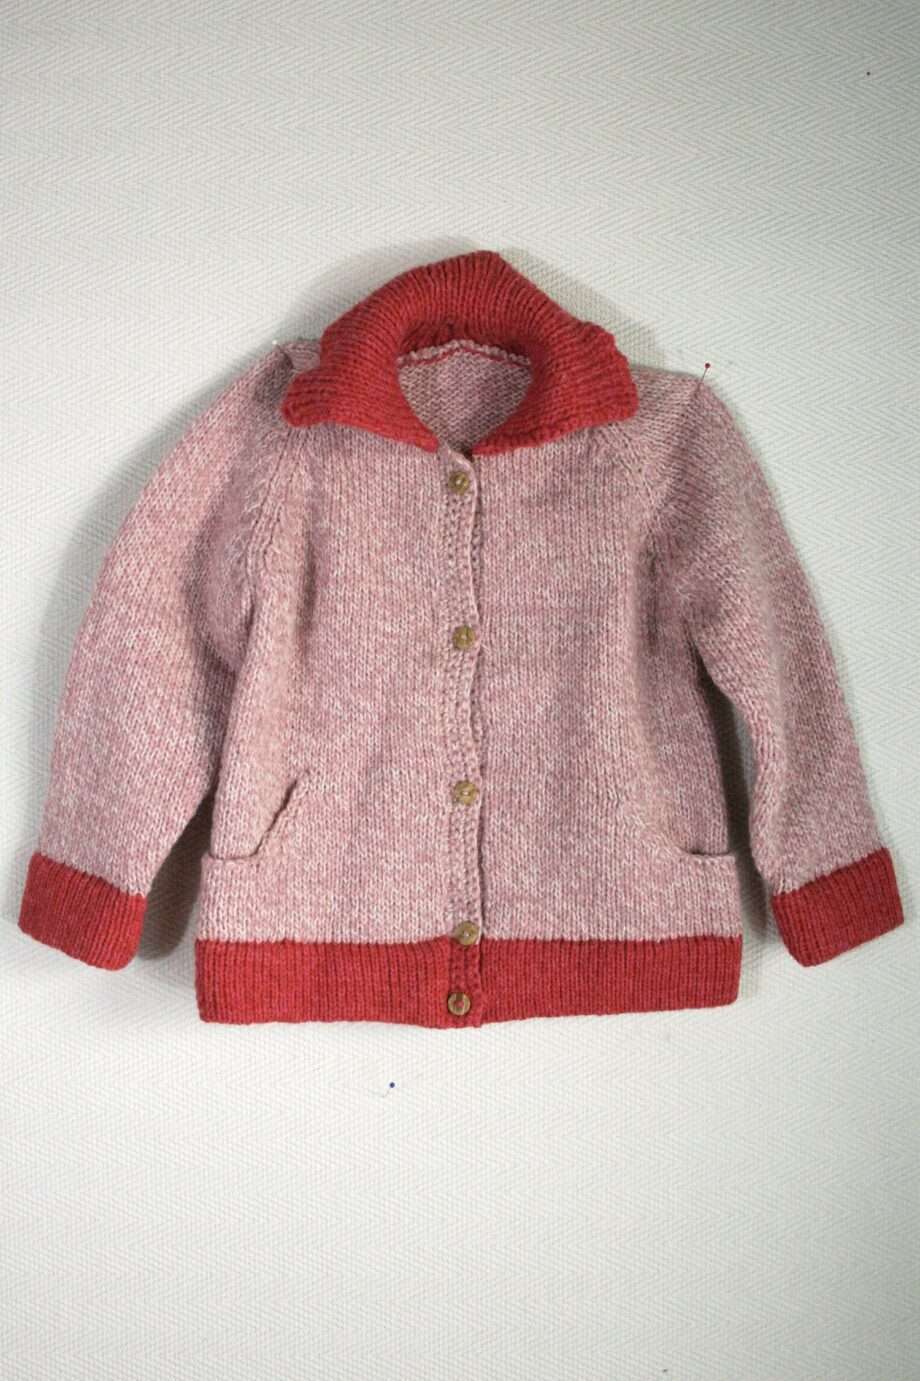 knitted woolen cardigan basic pink